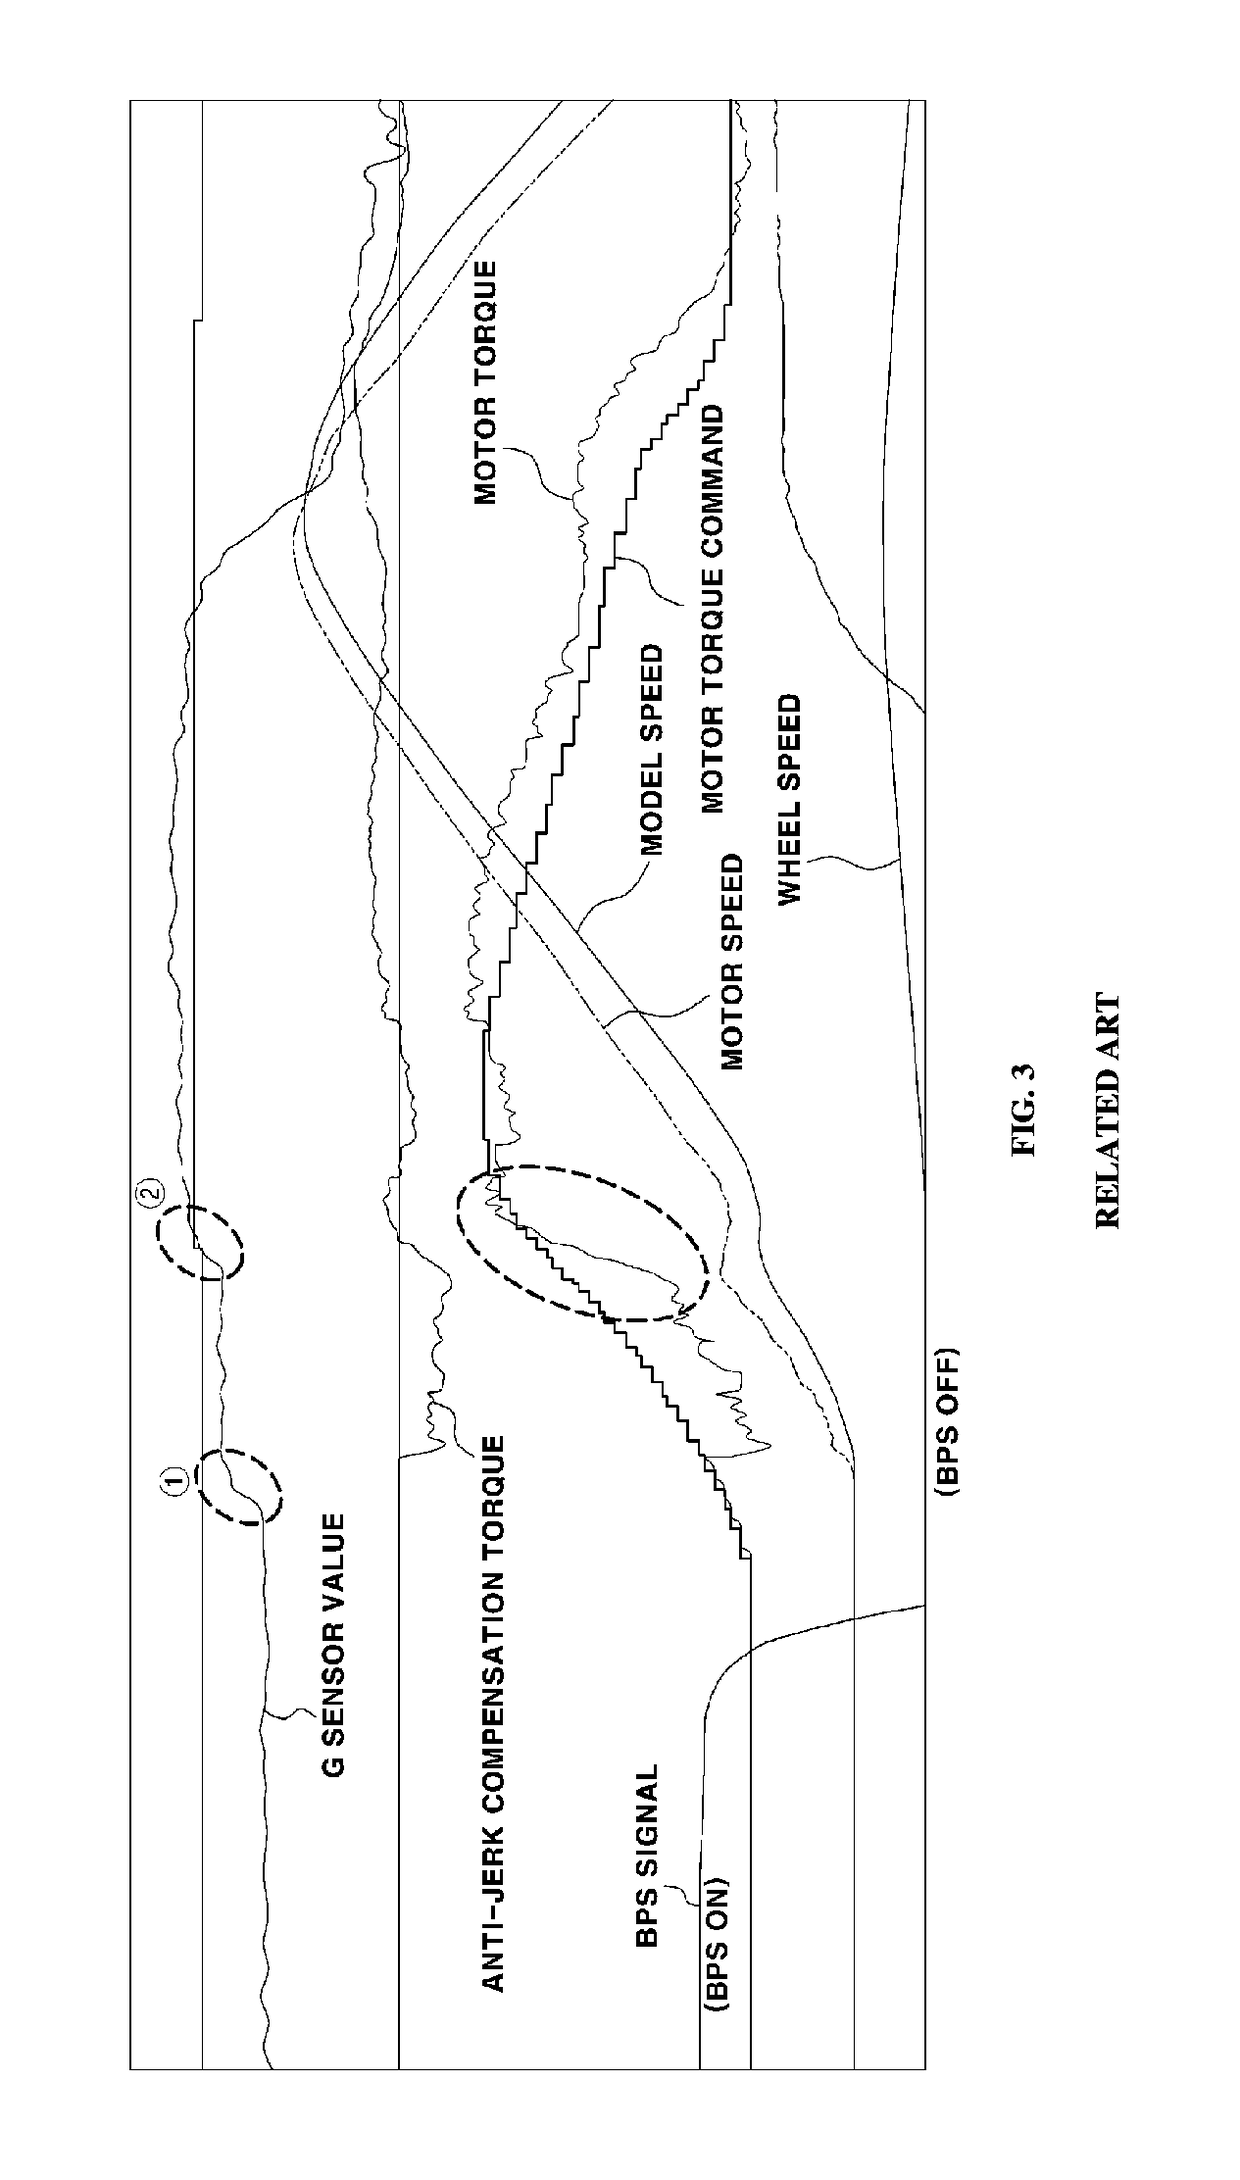 Anti-jerk control system and method of eco-friendly vehicle